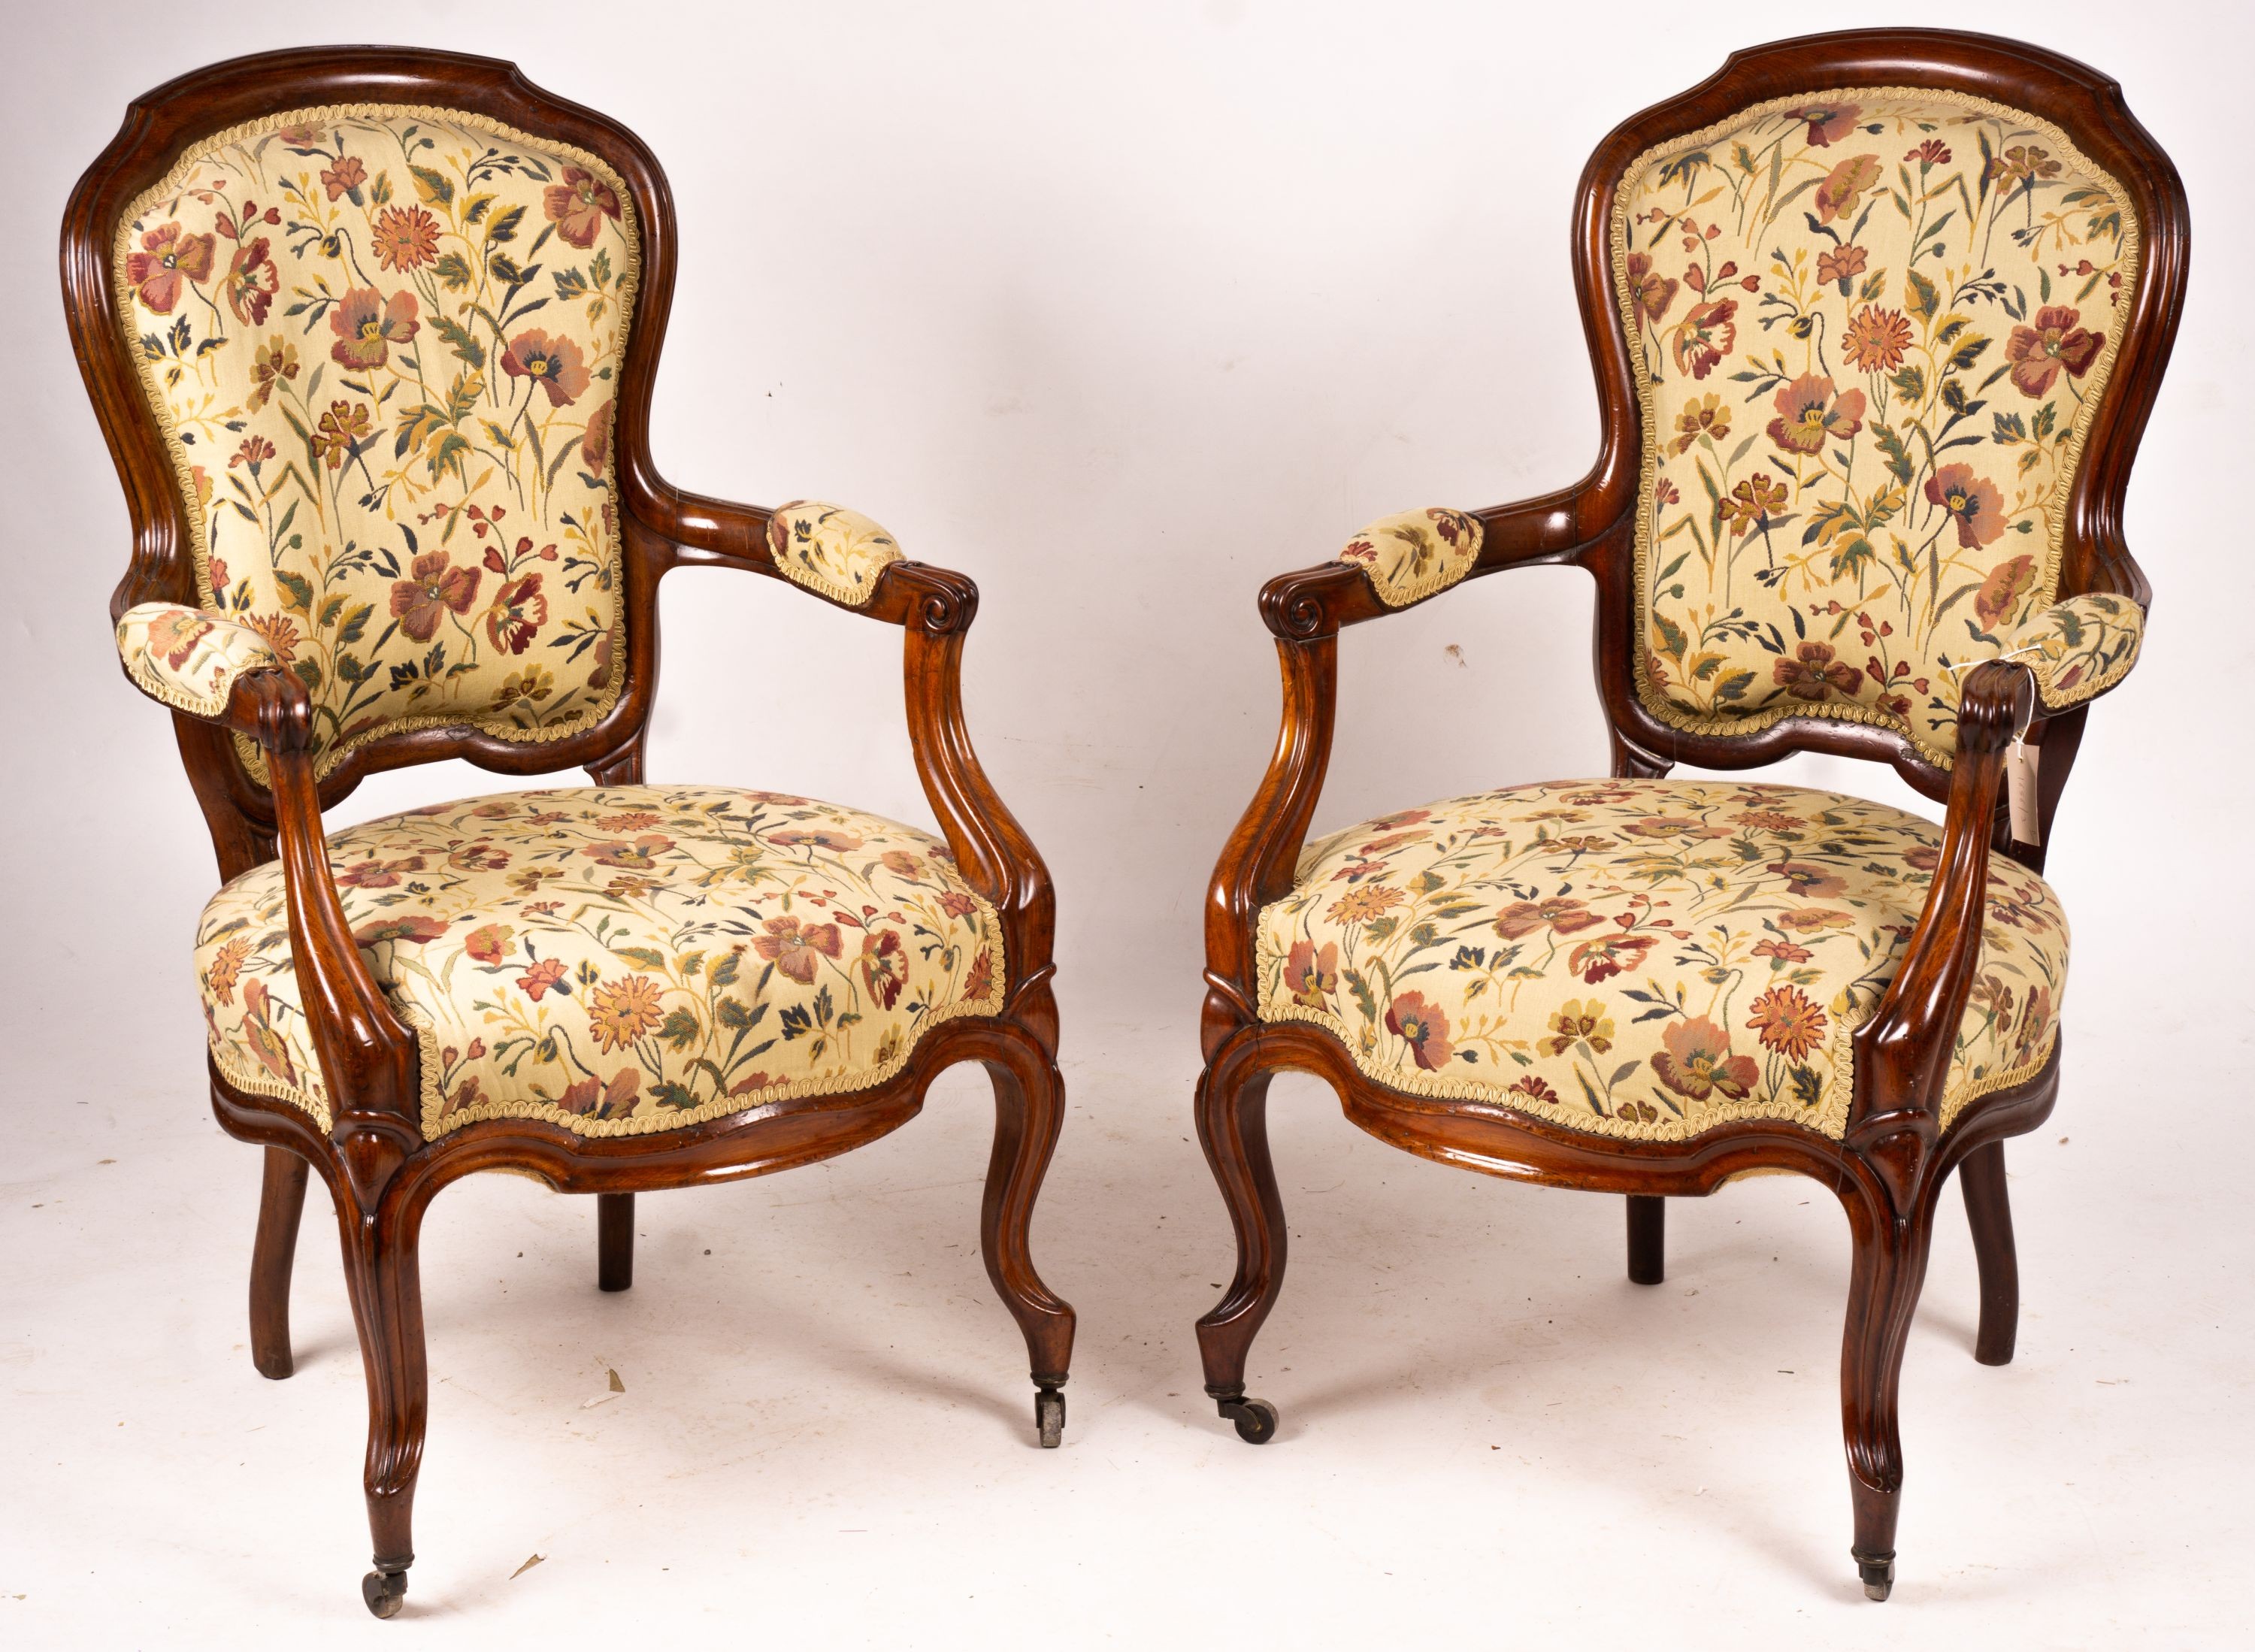 A pair of French mahogany framed open armchairs, width 60cm, depth 50cm, height 100cm